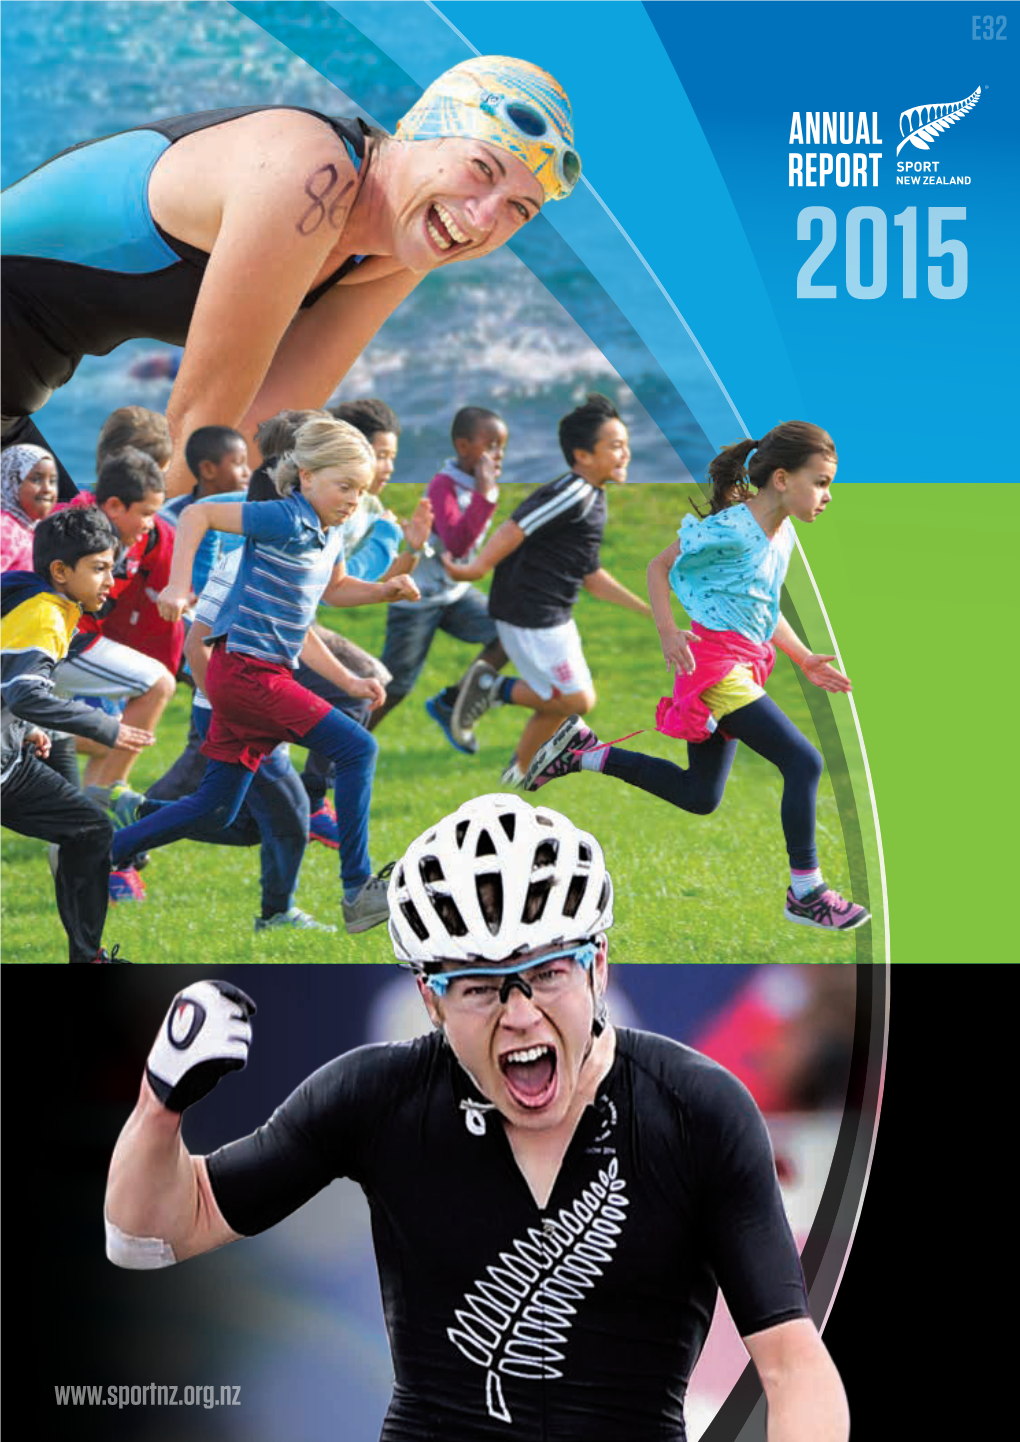 Annual Report for the Year Ended 30 June 2015